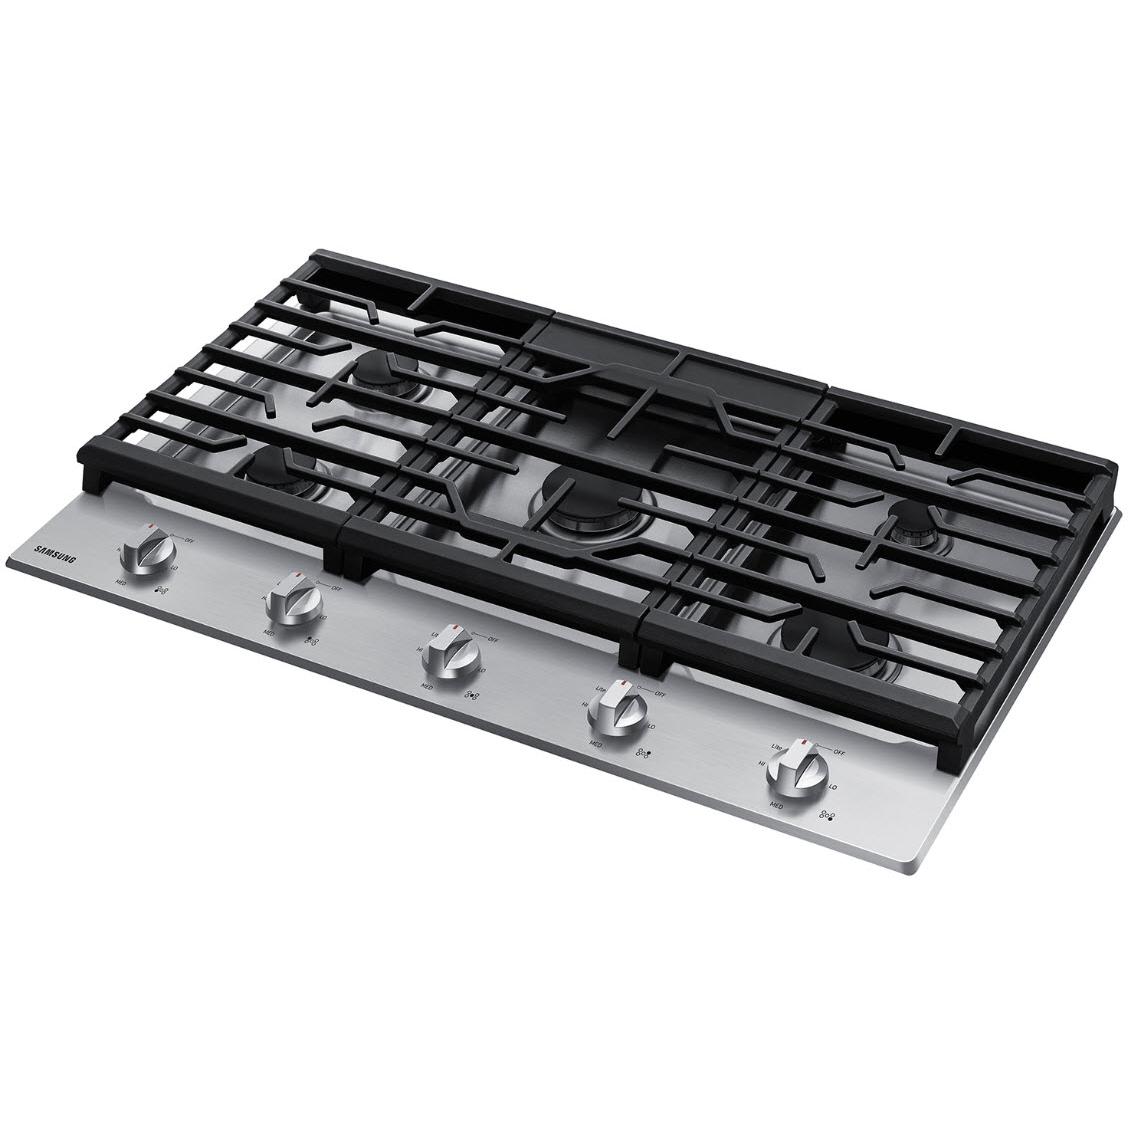 Samsung 36-inch Built-in Gas Cooktop NA36R5310FS/AA